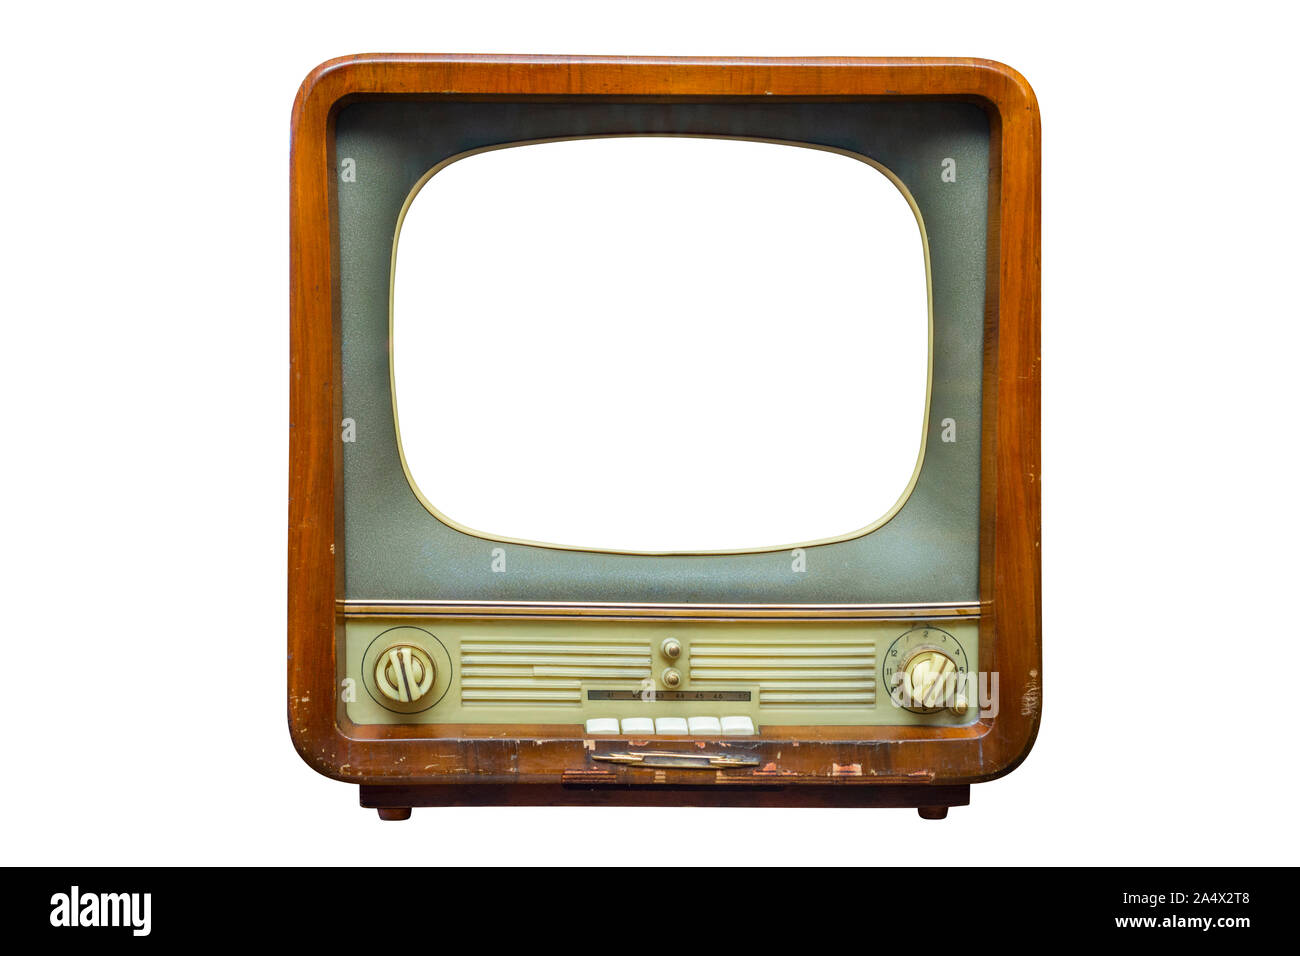 Vintage television with cut out screen for mock up isolated on white  background. Retro tv with wooden case Stock Photo - Alamy